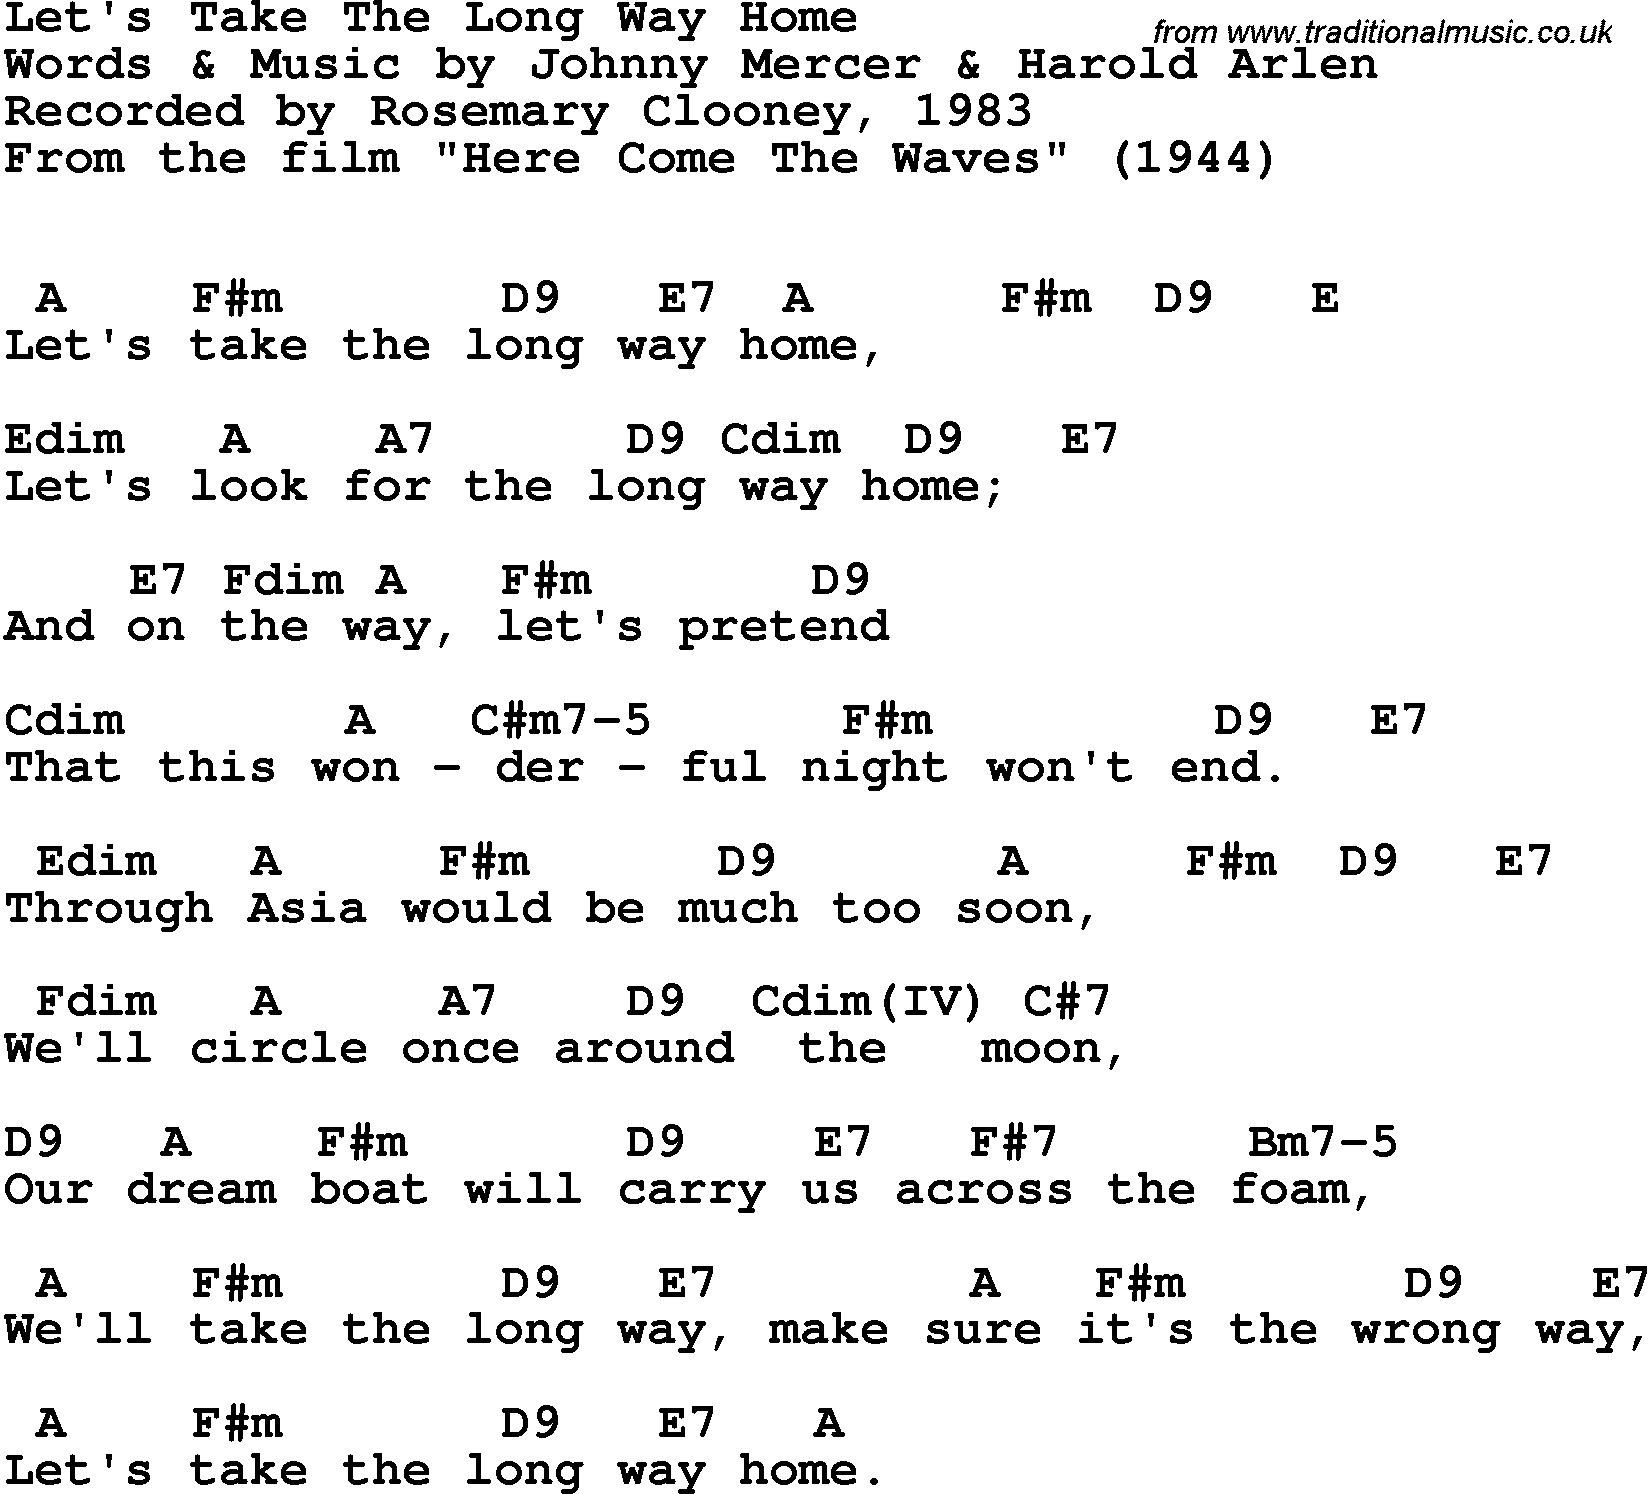 Song Lyrics with guitar chords for Let's Take The Long Way Home - Rosemary Clooney, 1983